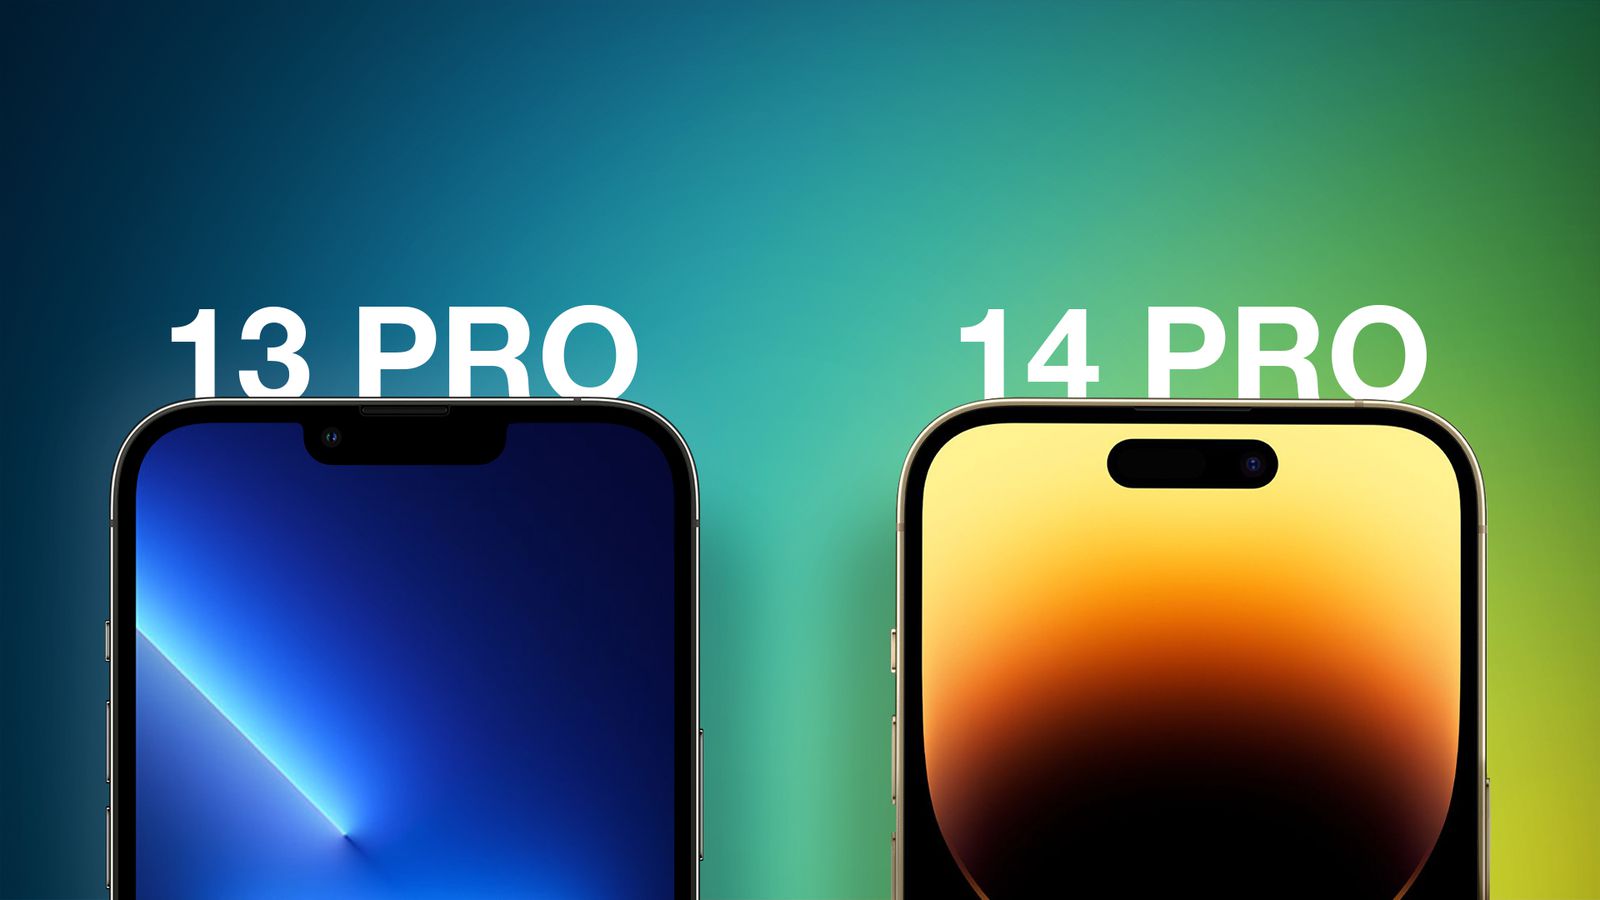 Iphone 13 Pro Vs Iphone 14 Pro Buyers Guide Should You Upgrade